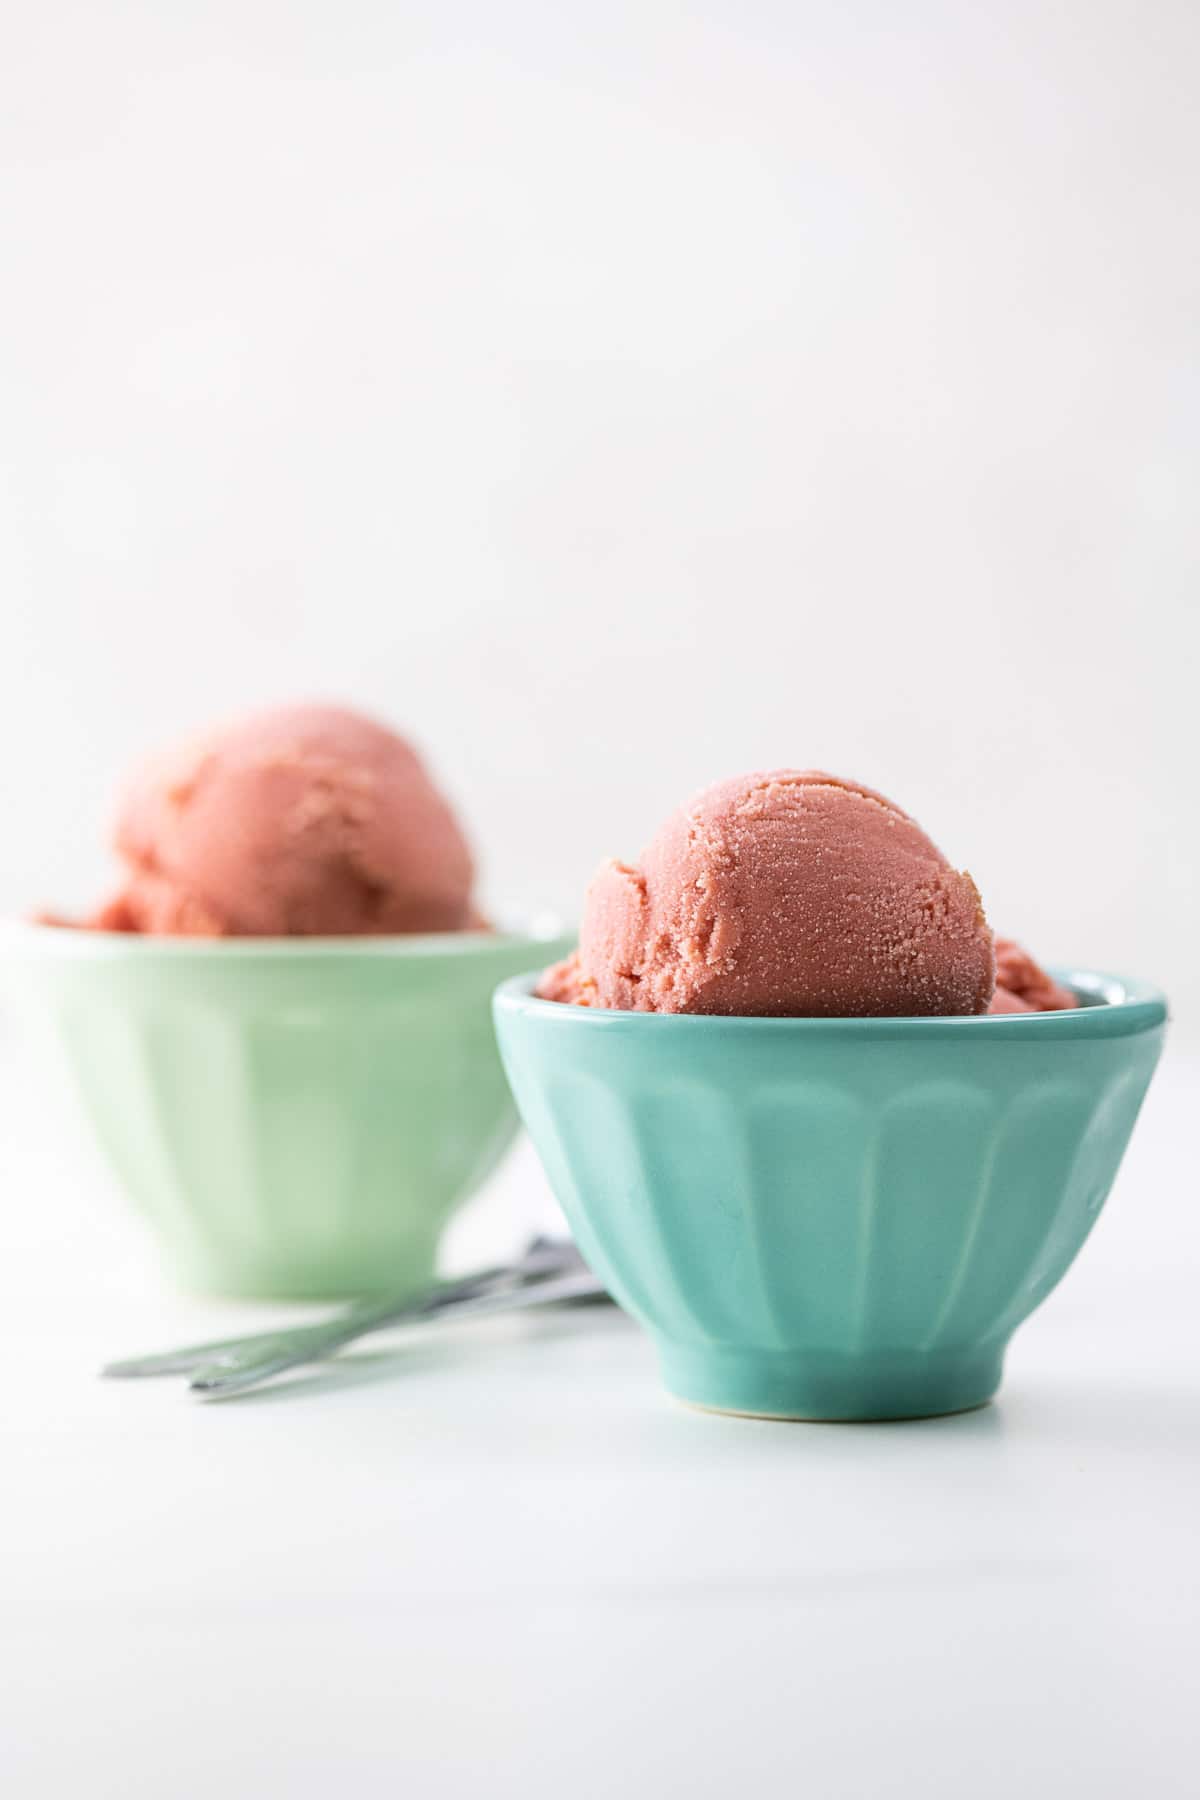 sour cherry frozen yogurt scooped into small bowls with spoons